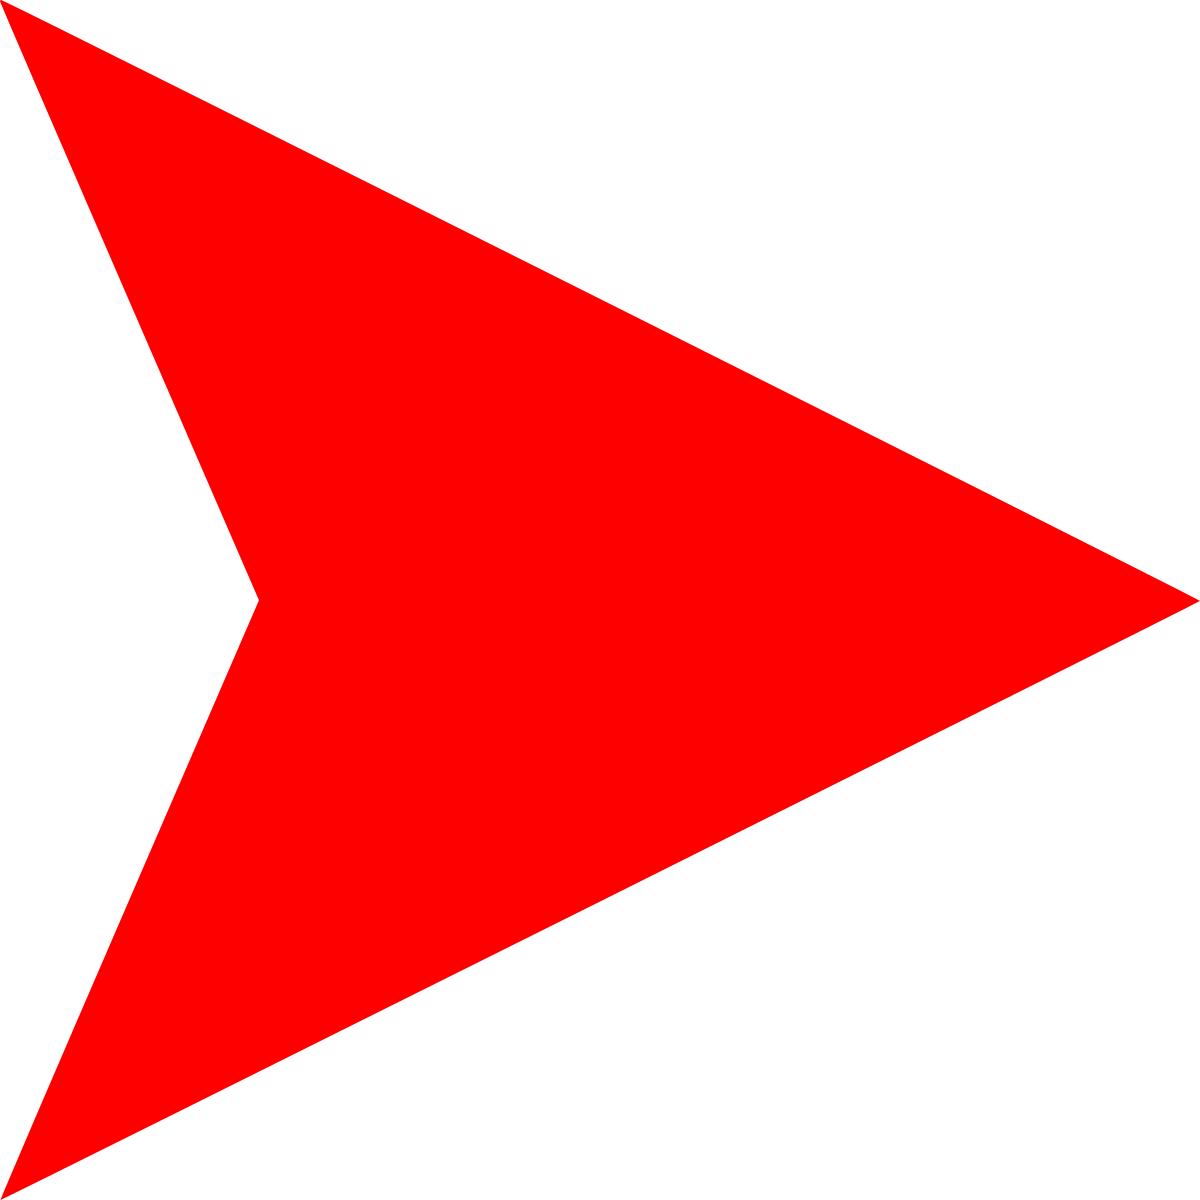 Download File:Red Arrow Right.svg - Wikimedia Commons